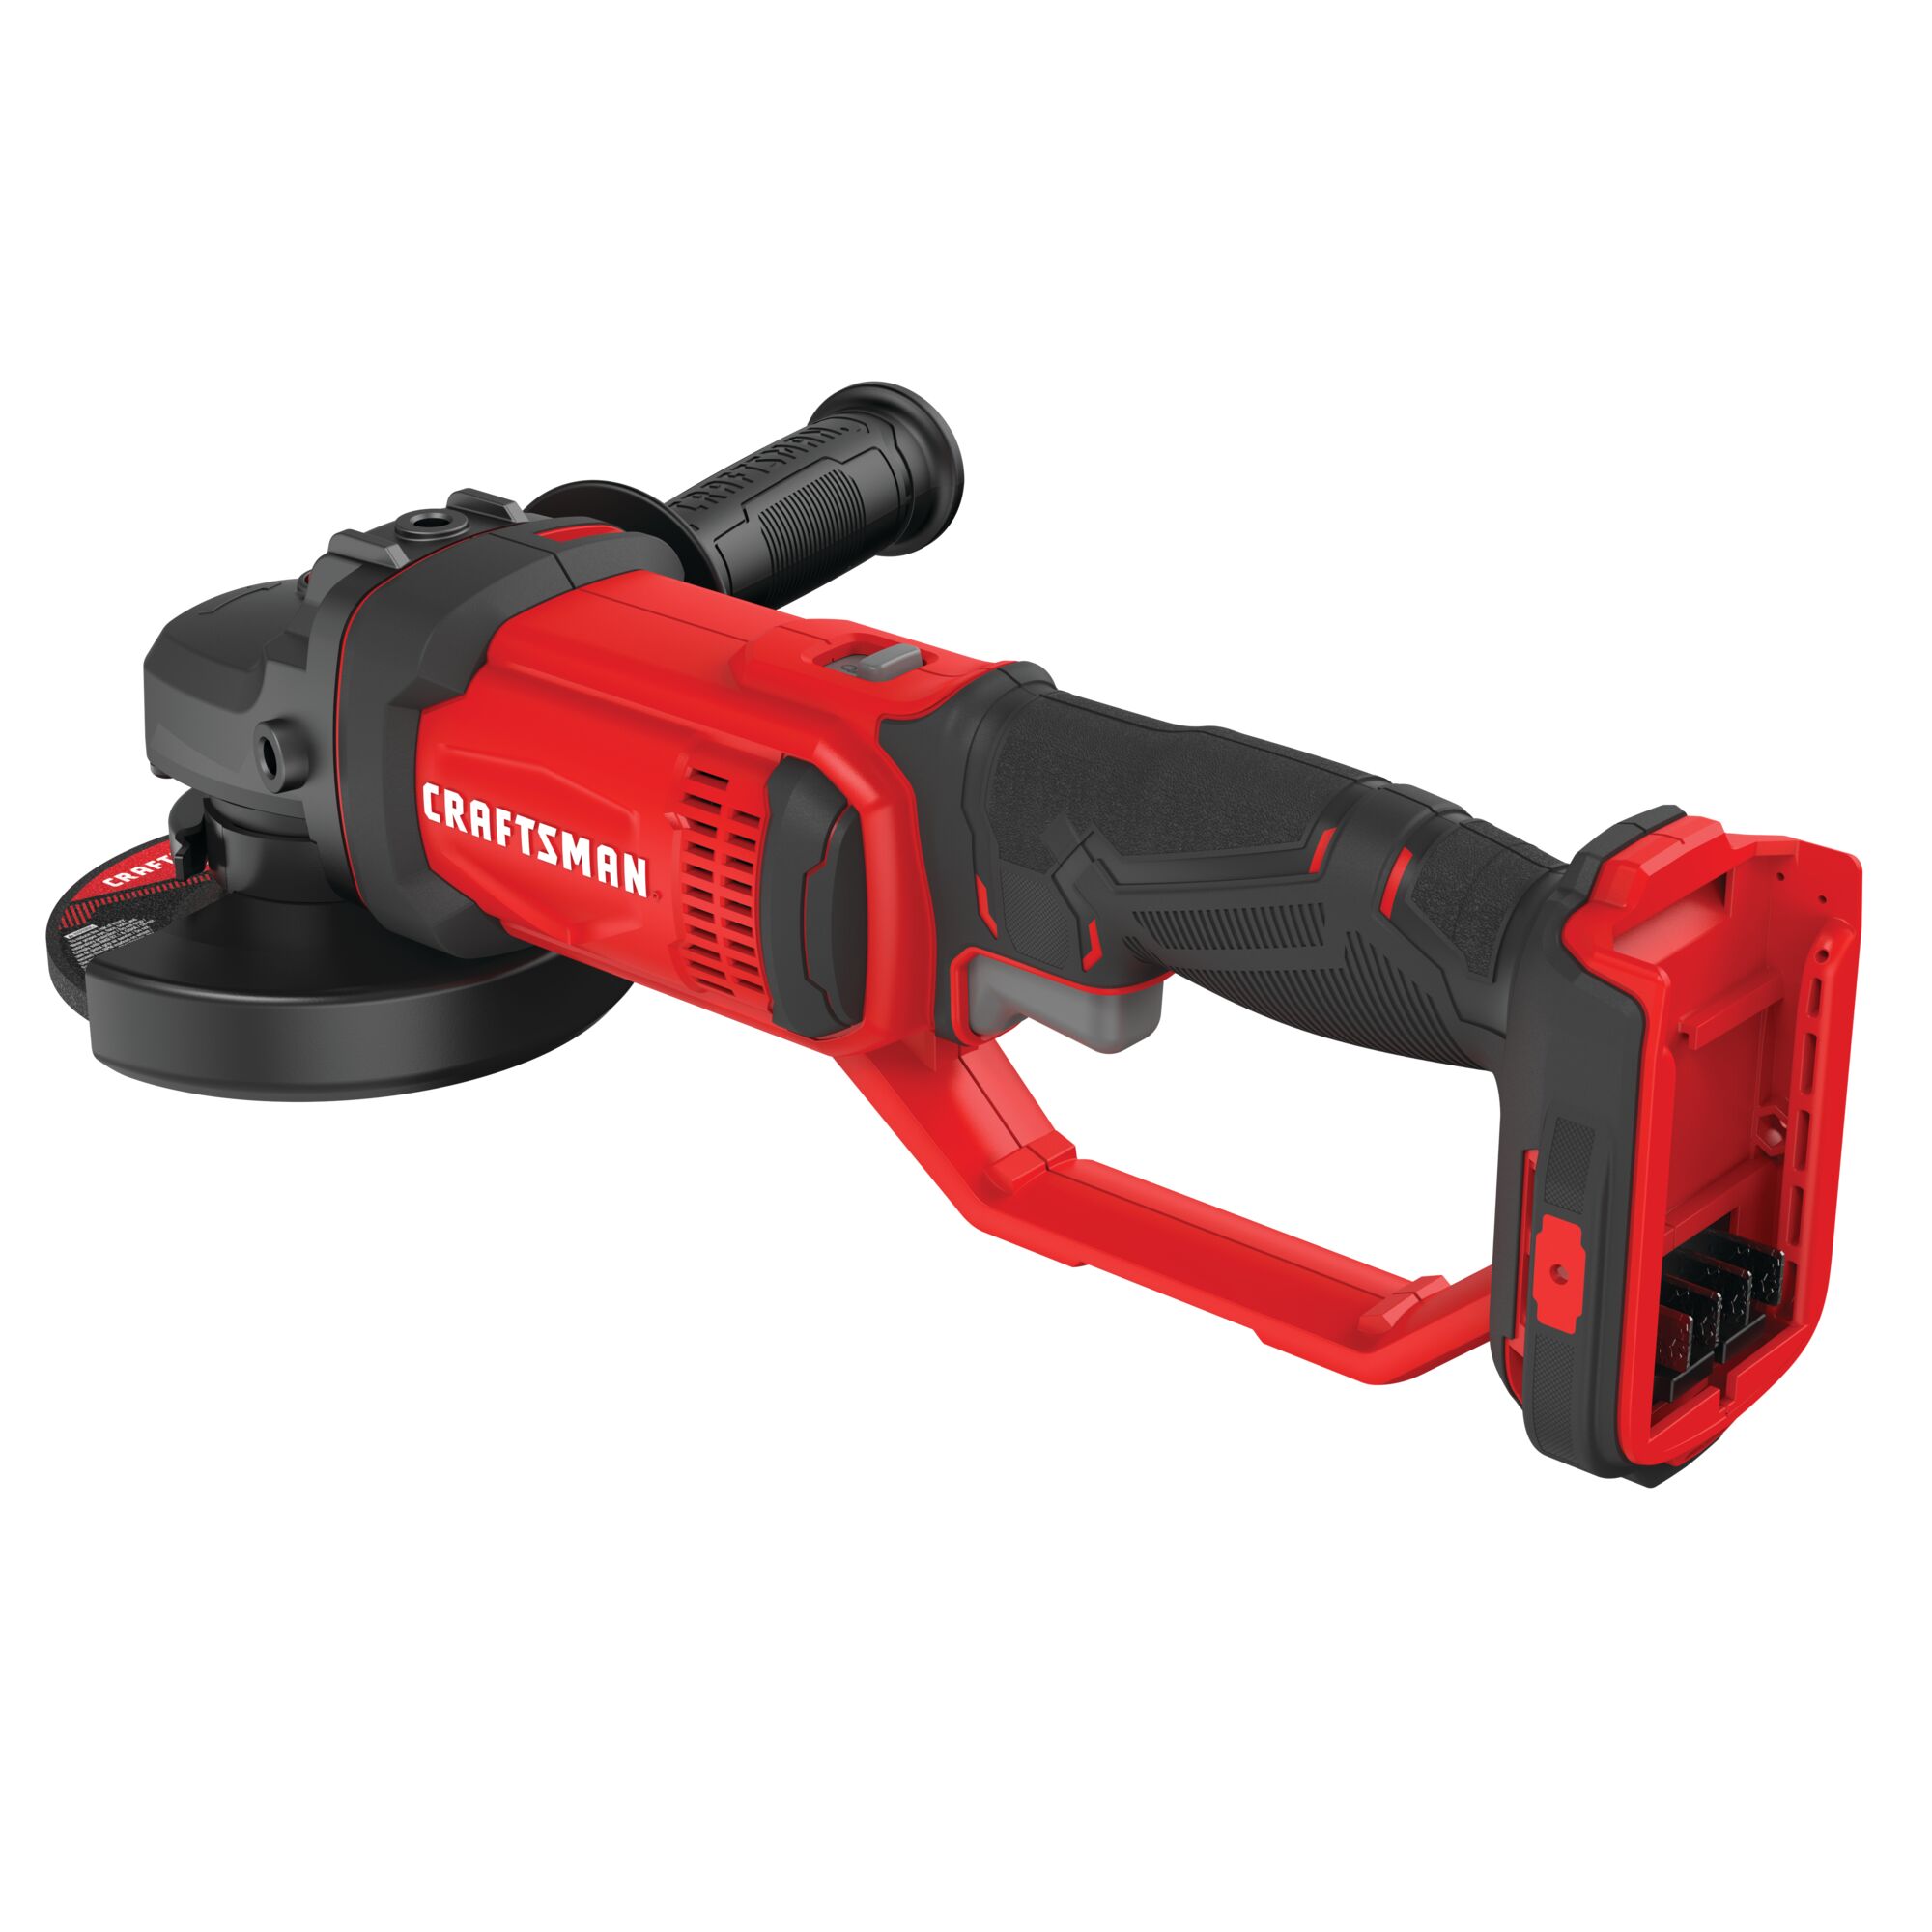 Cordless 4 and half inch small angle grinder tool.